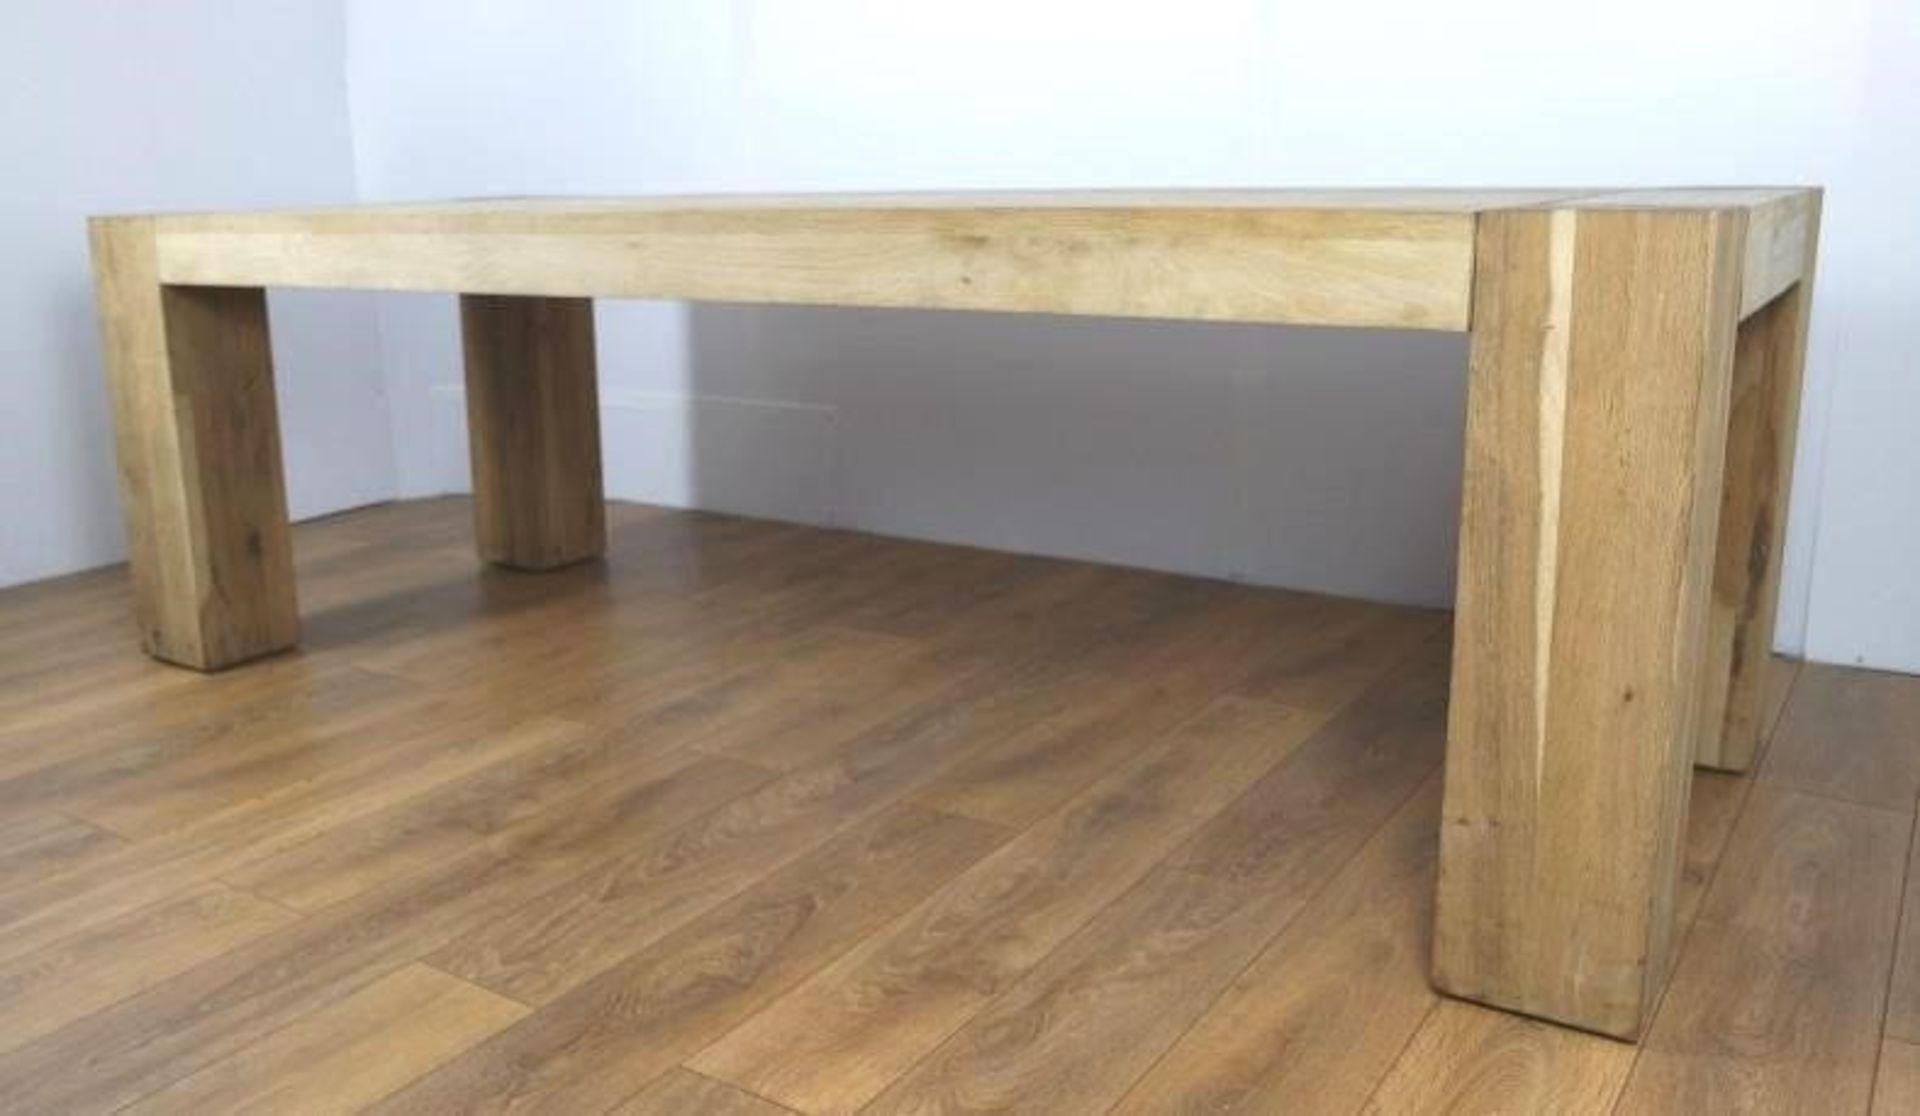 1 x Halo Furniture ‘Loft’ Reclaimed English Timber Dining Table - Natural Finish - Dimensions: L250c - Image 2 of 7